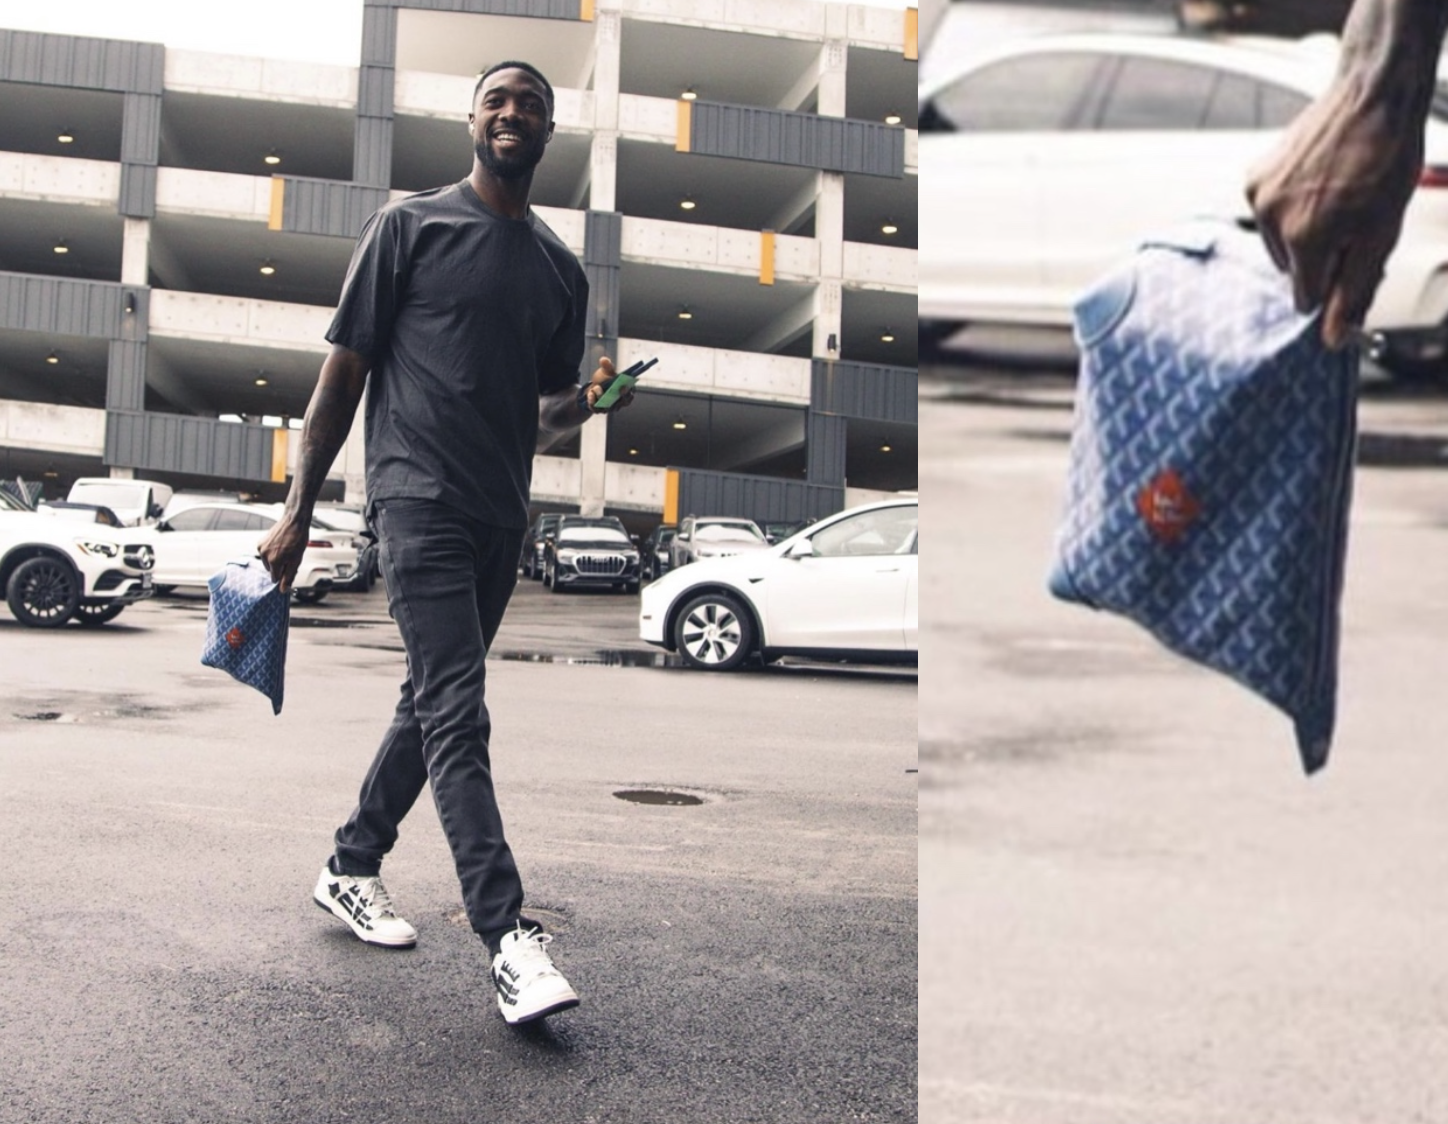 Chellz on X: Why do footballers carry a toiletry bag all the time